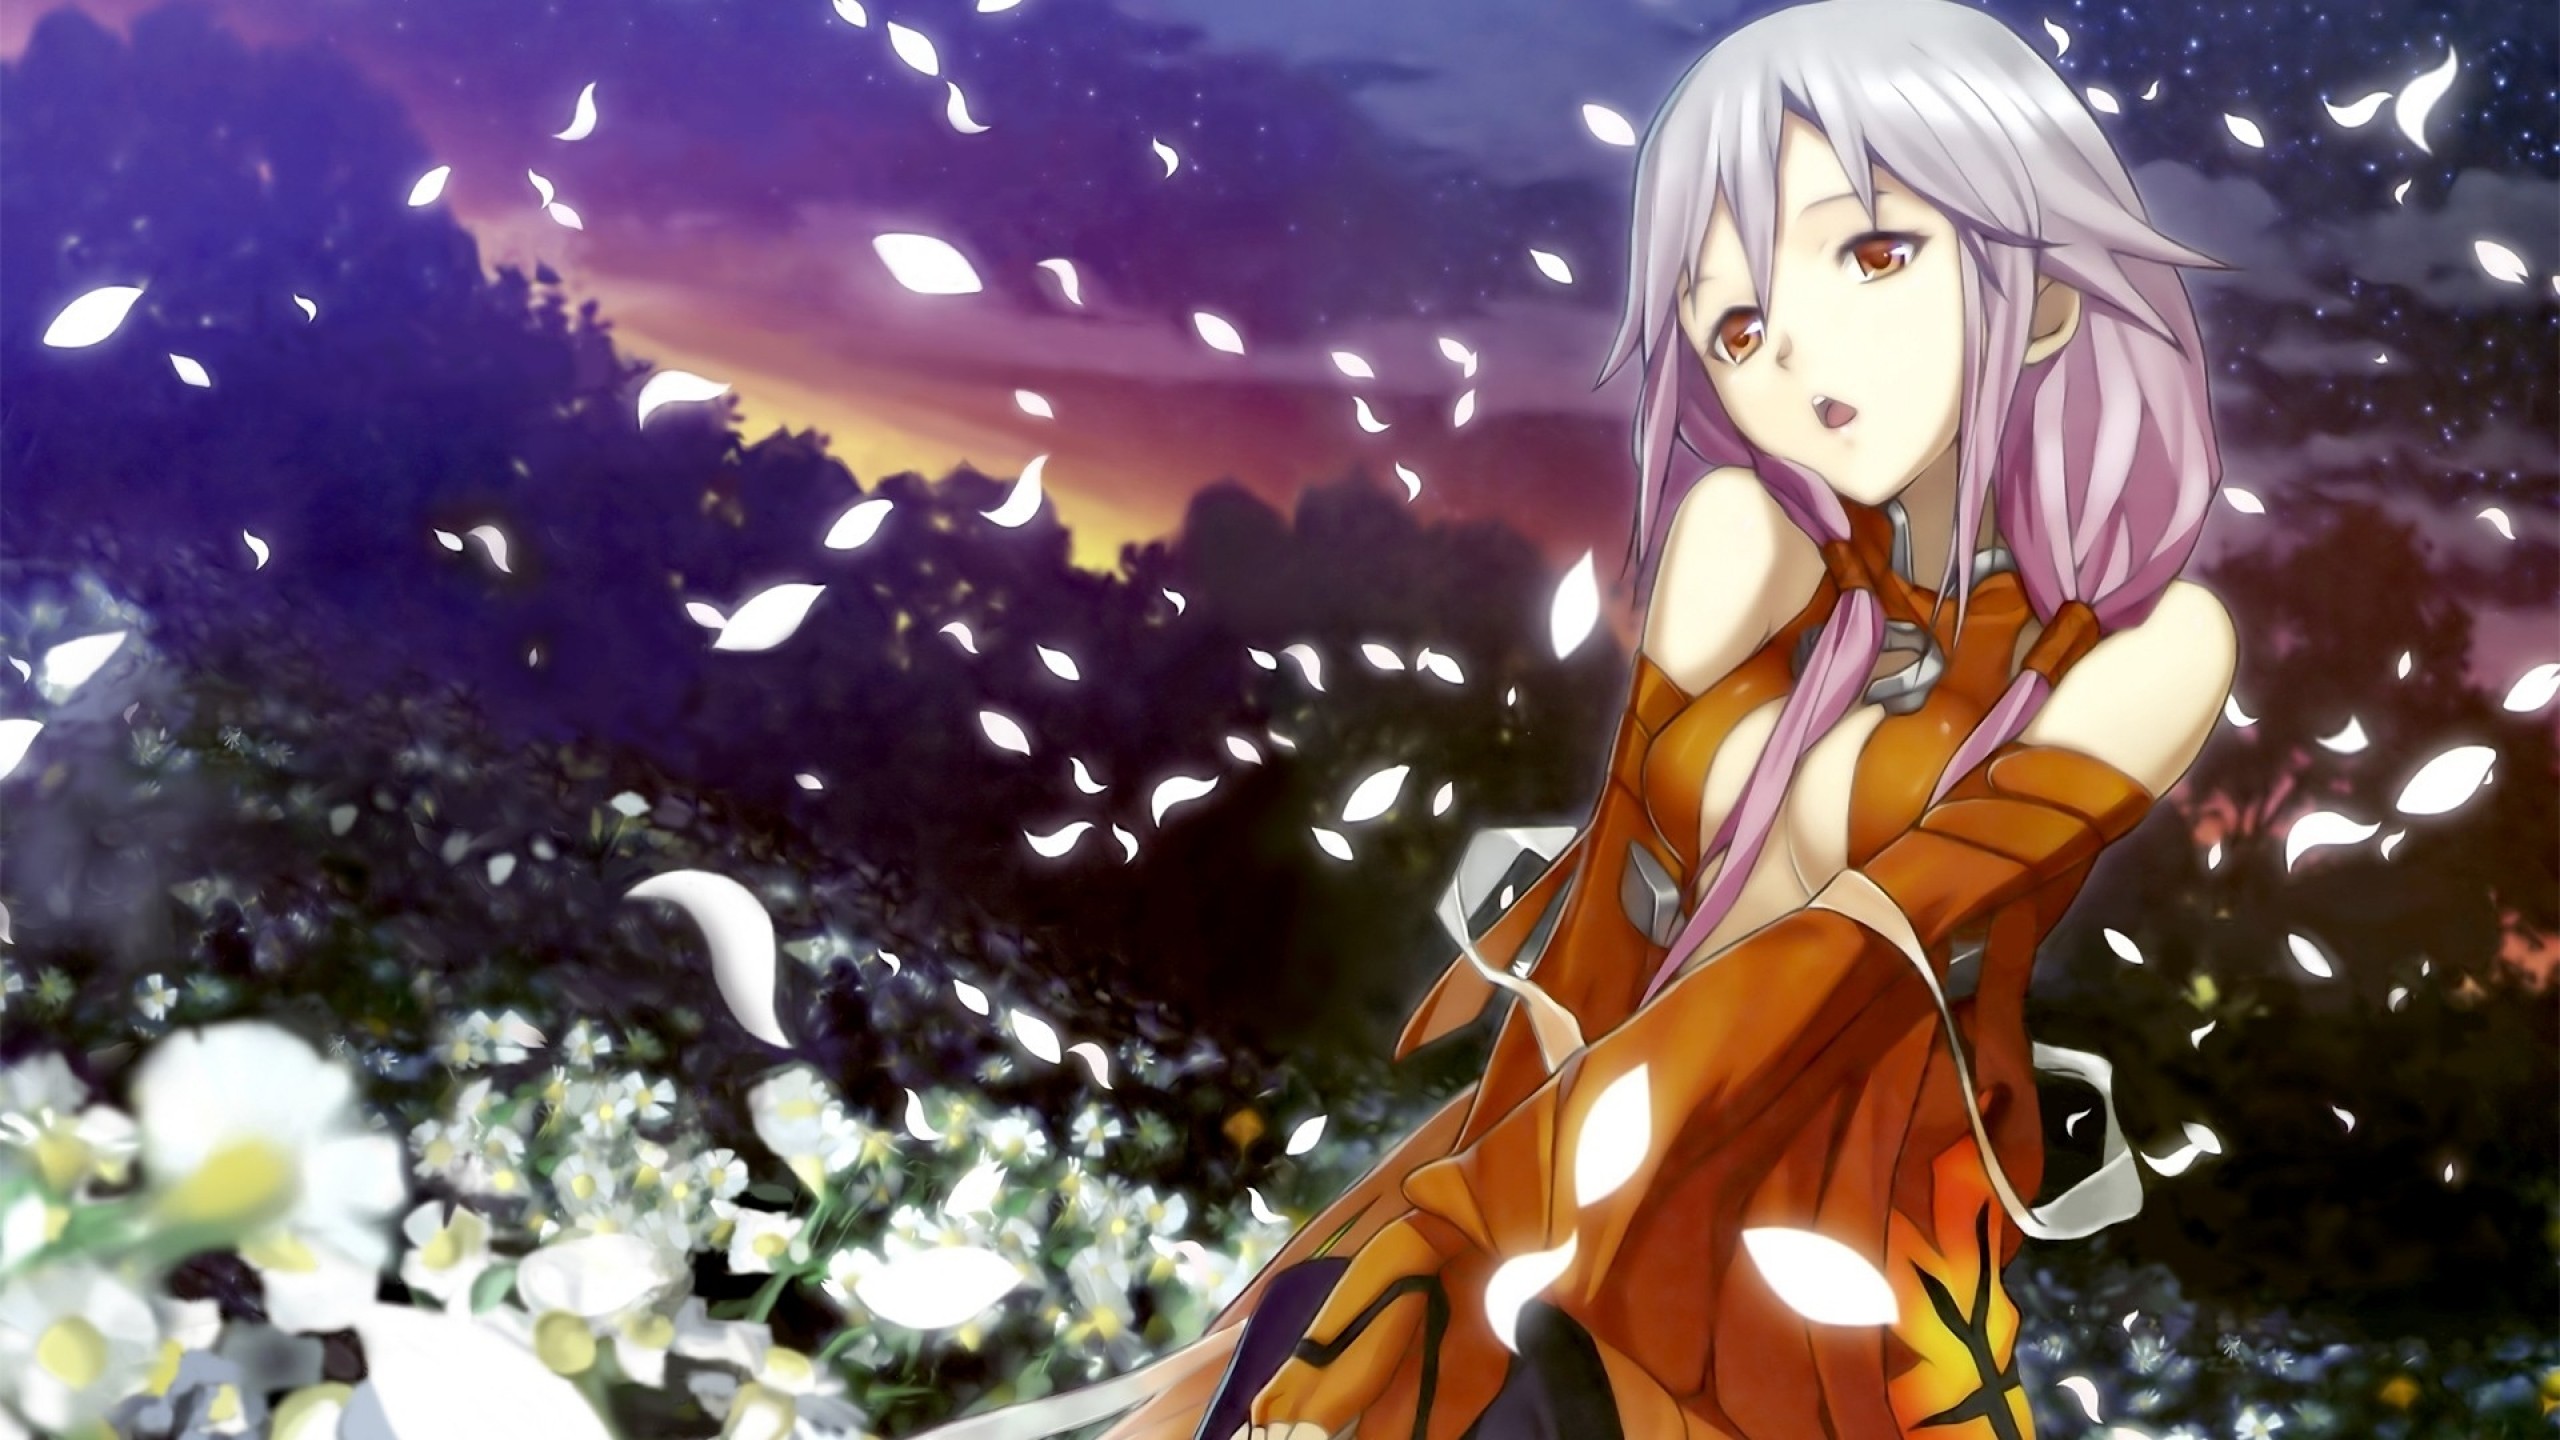 Anime 2560x1440 anime Guilty Crown anime girls Yuzuriha Inori red eyes boobs cleavage open mouth flowers plants